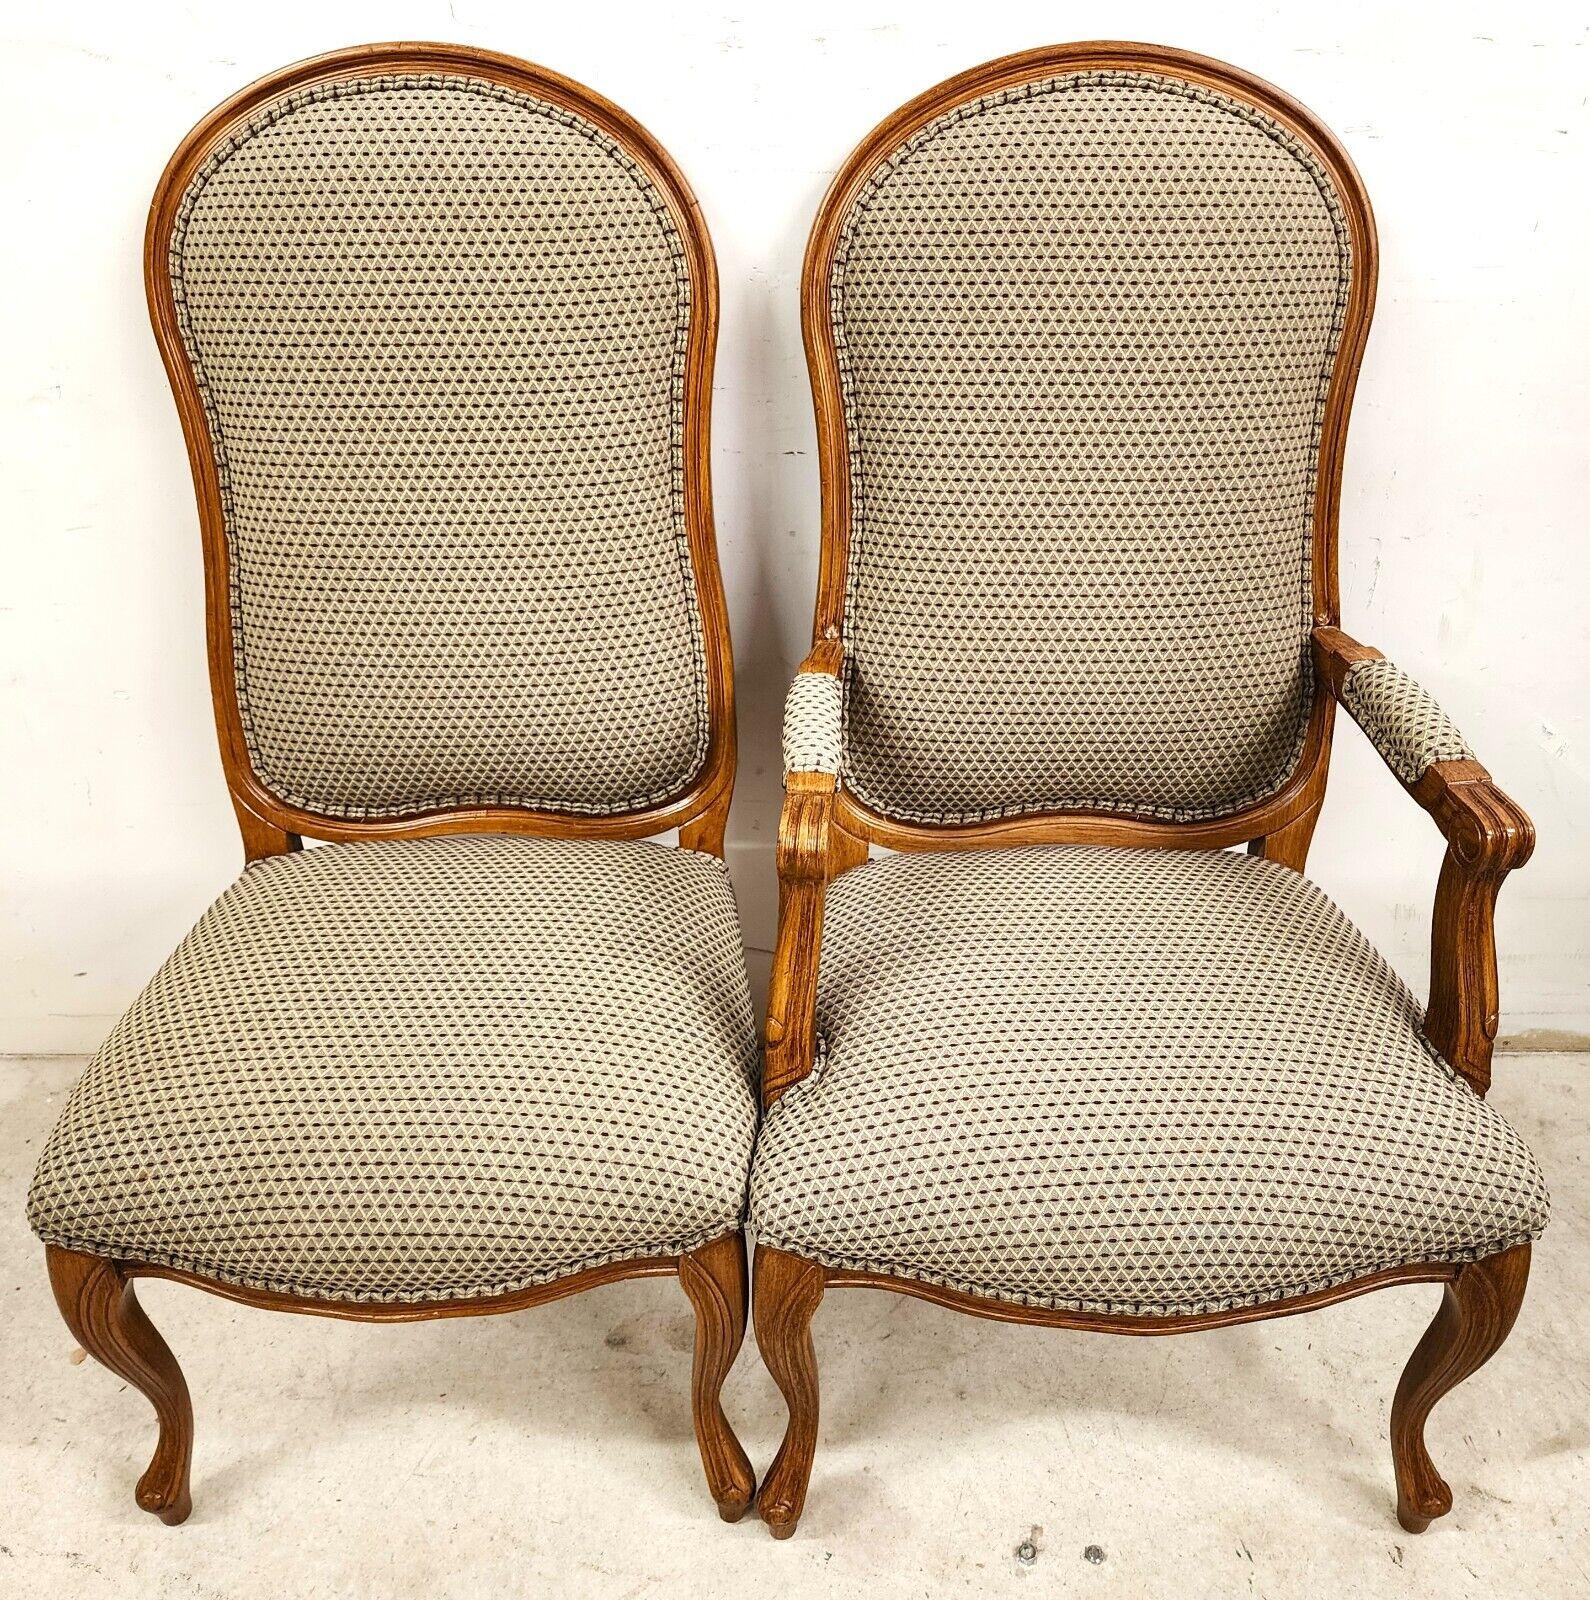 For FULL item description click on CONTINUE READING at the bottom of this page.

Offering One Of Our Recent Palm Beach Estate Fine Furniture Acquisitions Of A
Set of 10 Louis XV French Style Oversized Dining Chairs 
Set includes 2 arm and 8 side